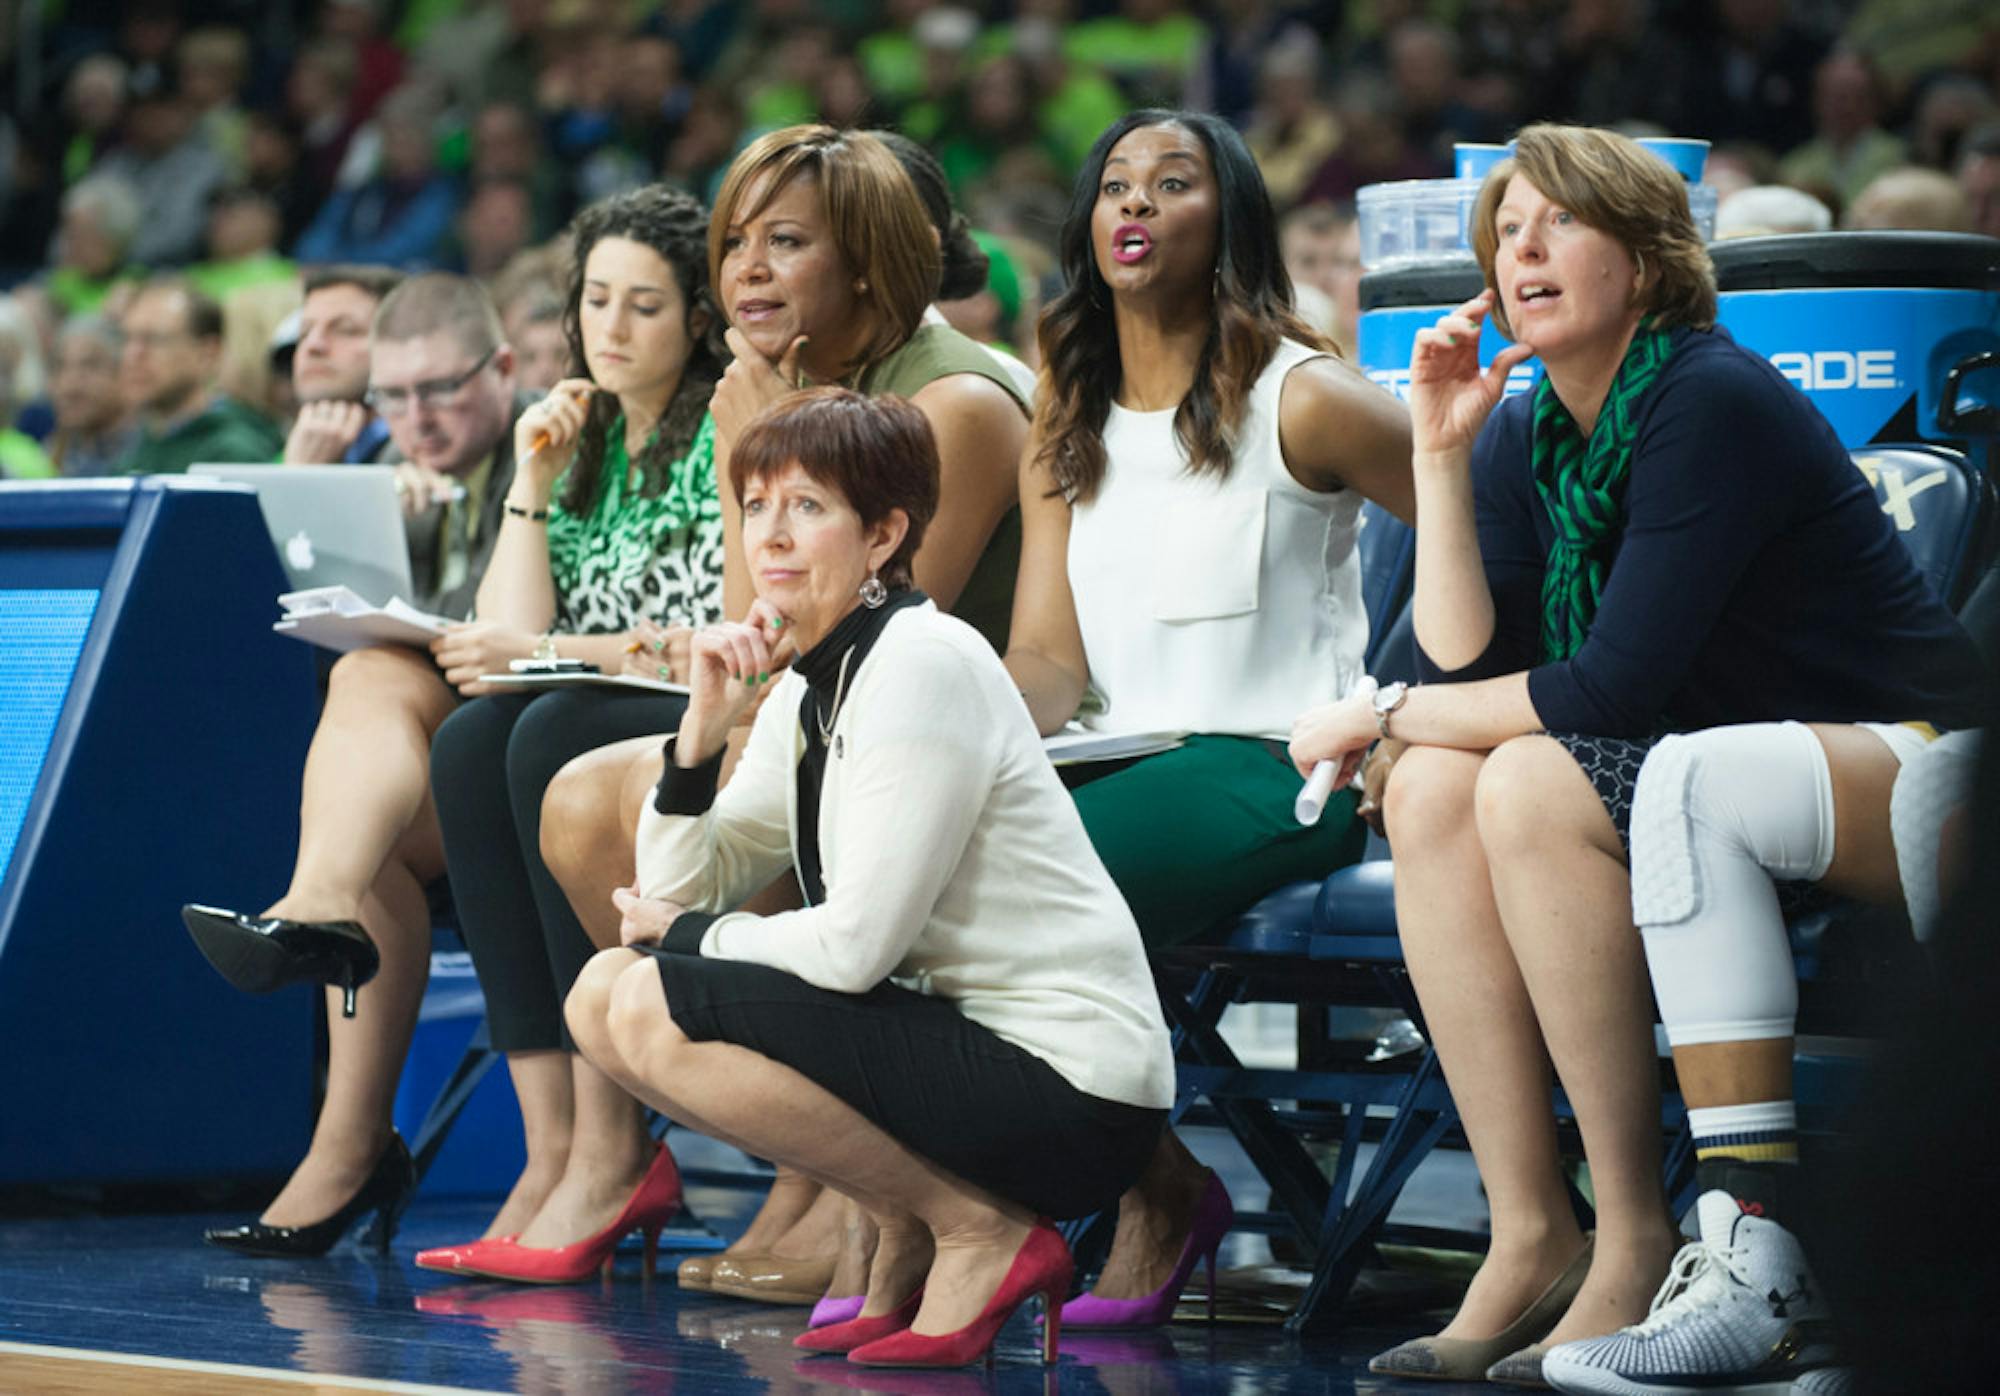 Muffet McGraw squats on the sideline as she watches her team defeat Montana 77-43 to advance to the second round of the NCAA tournament on March 20, 2015 at Purcell Pavilion.